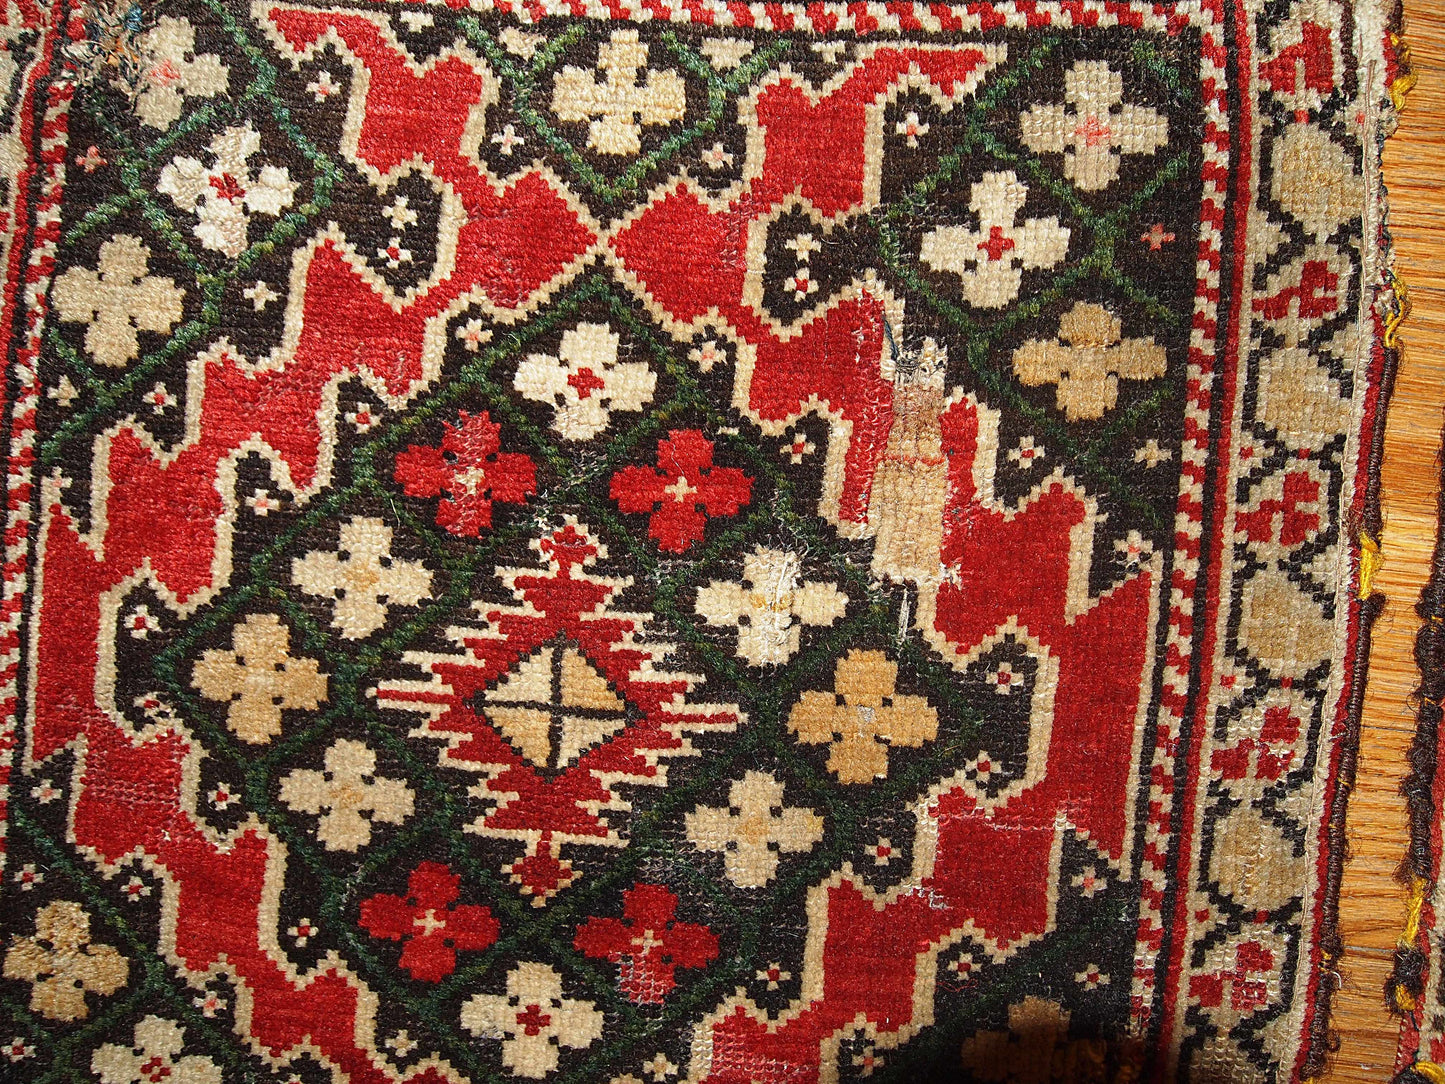 The pair of Armenian Karabaghs  in bright red color and beige borders. The darker shades of the rugs are not completely matchable: on one of them it has grass green color covering chocolate brown field and on another piece it is bright blue.